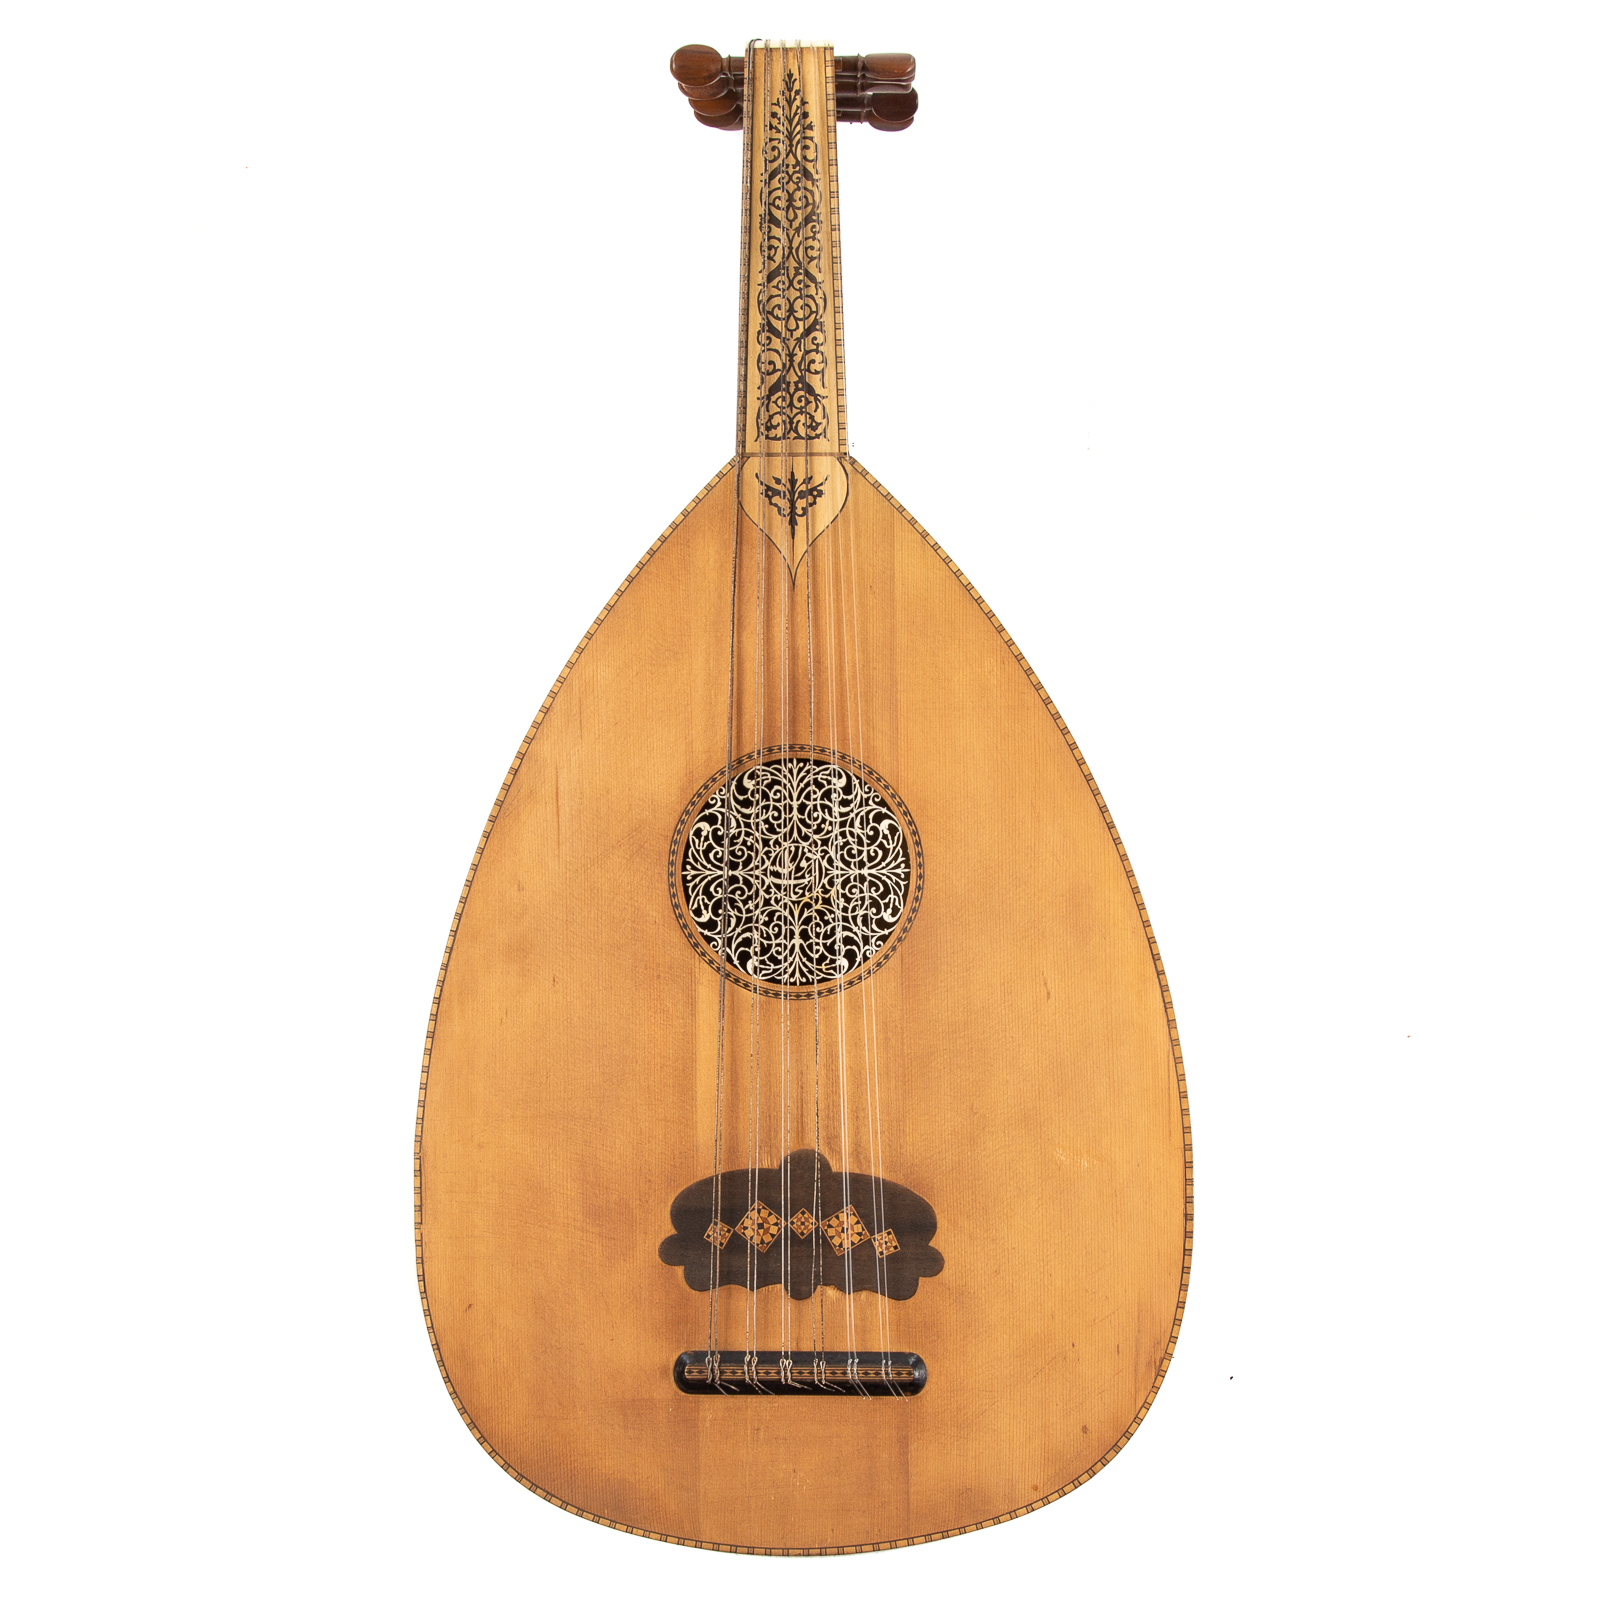 MIDDLE EASTERN LUTE 20th century;